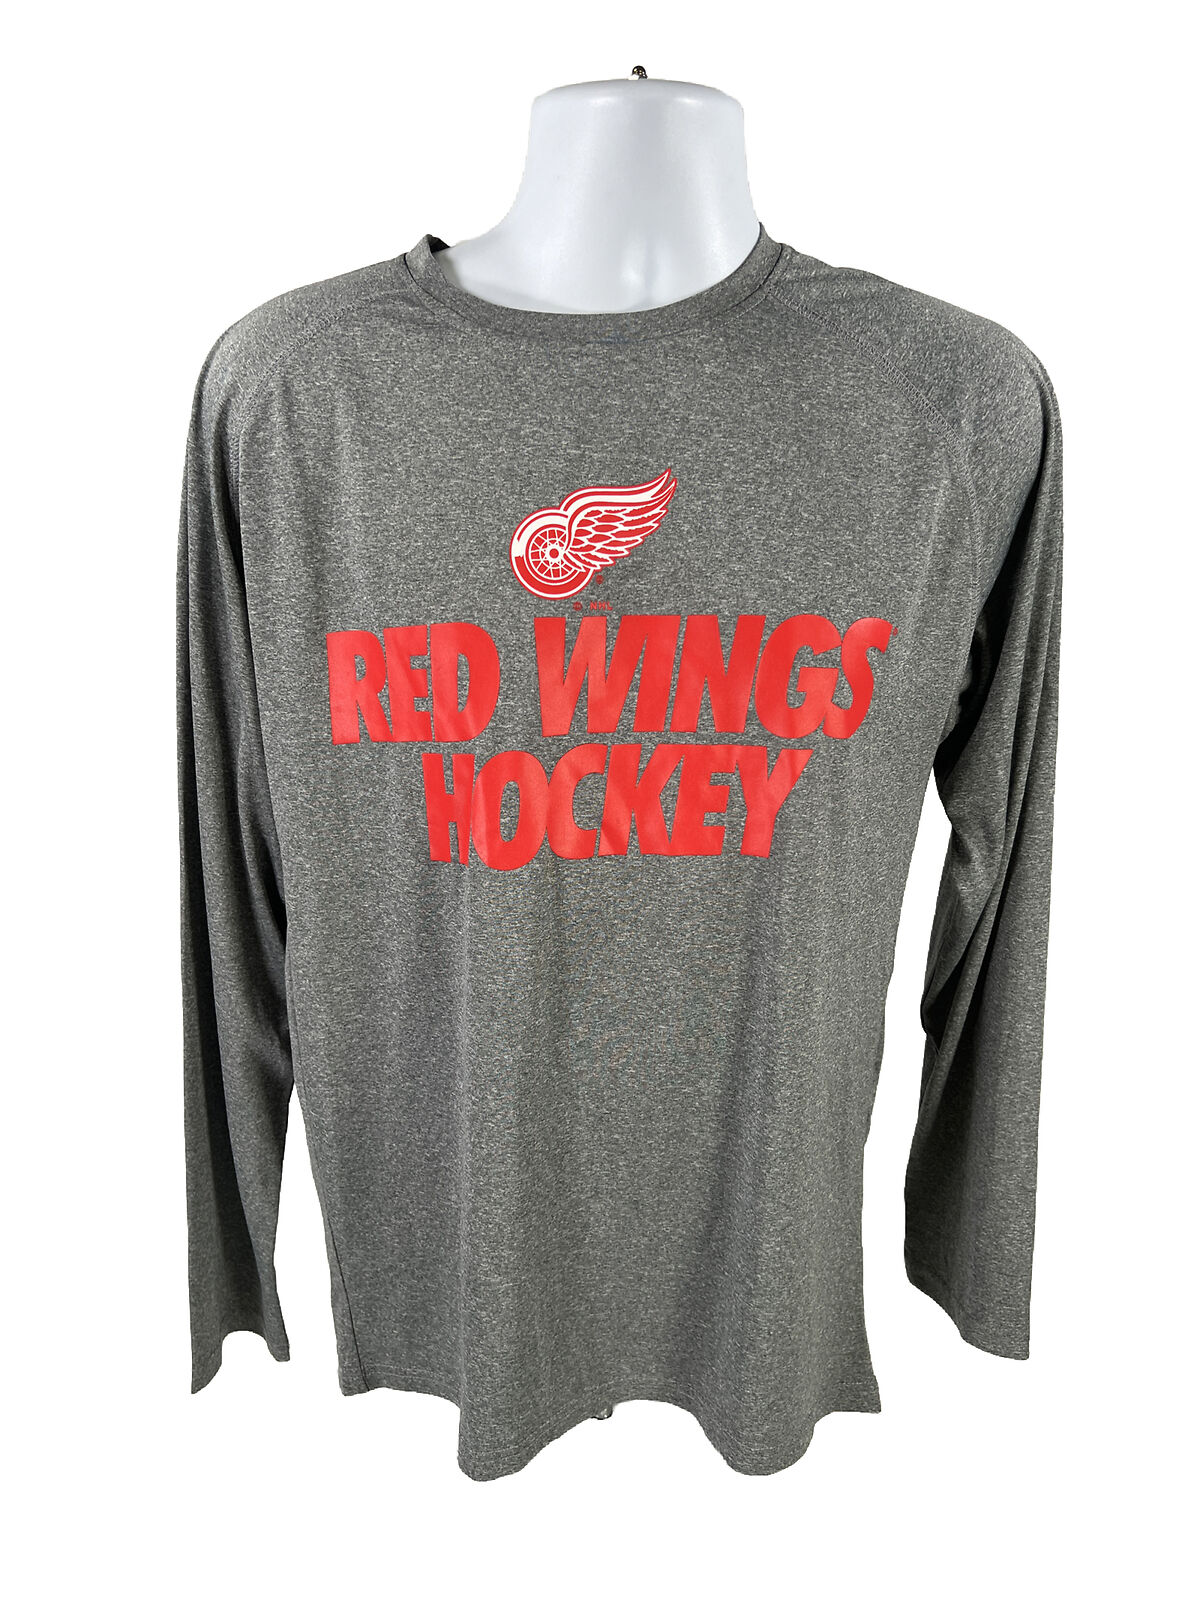 NHL Men's Detroit Red Wings Gray Graphic Long Sleeve Athletic Shirt - M